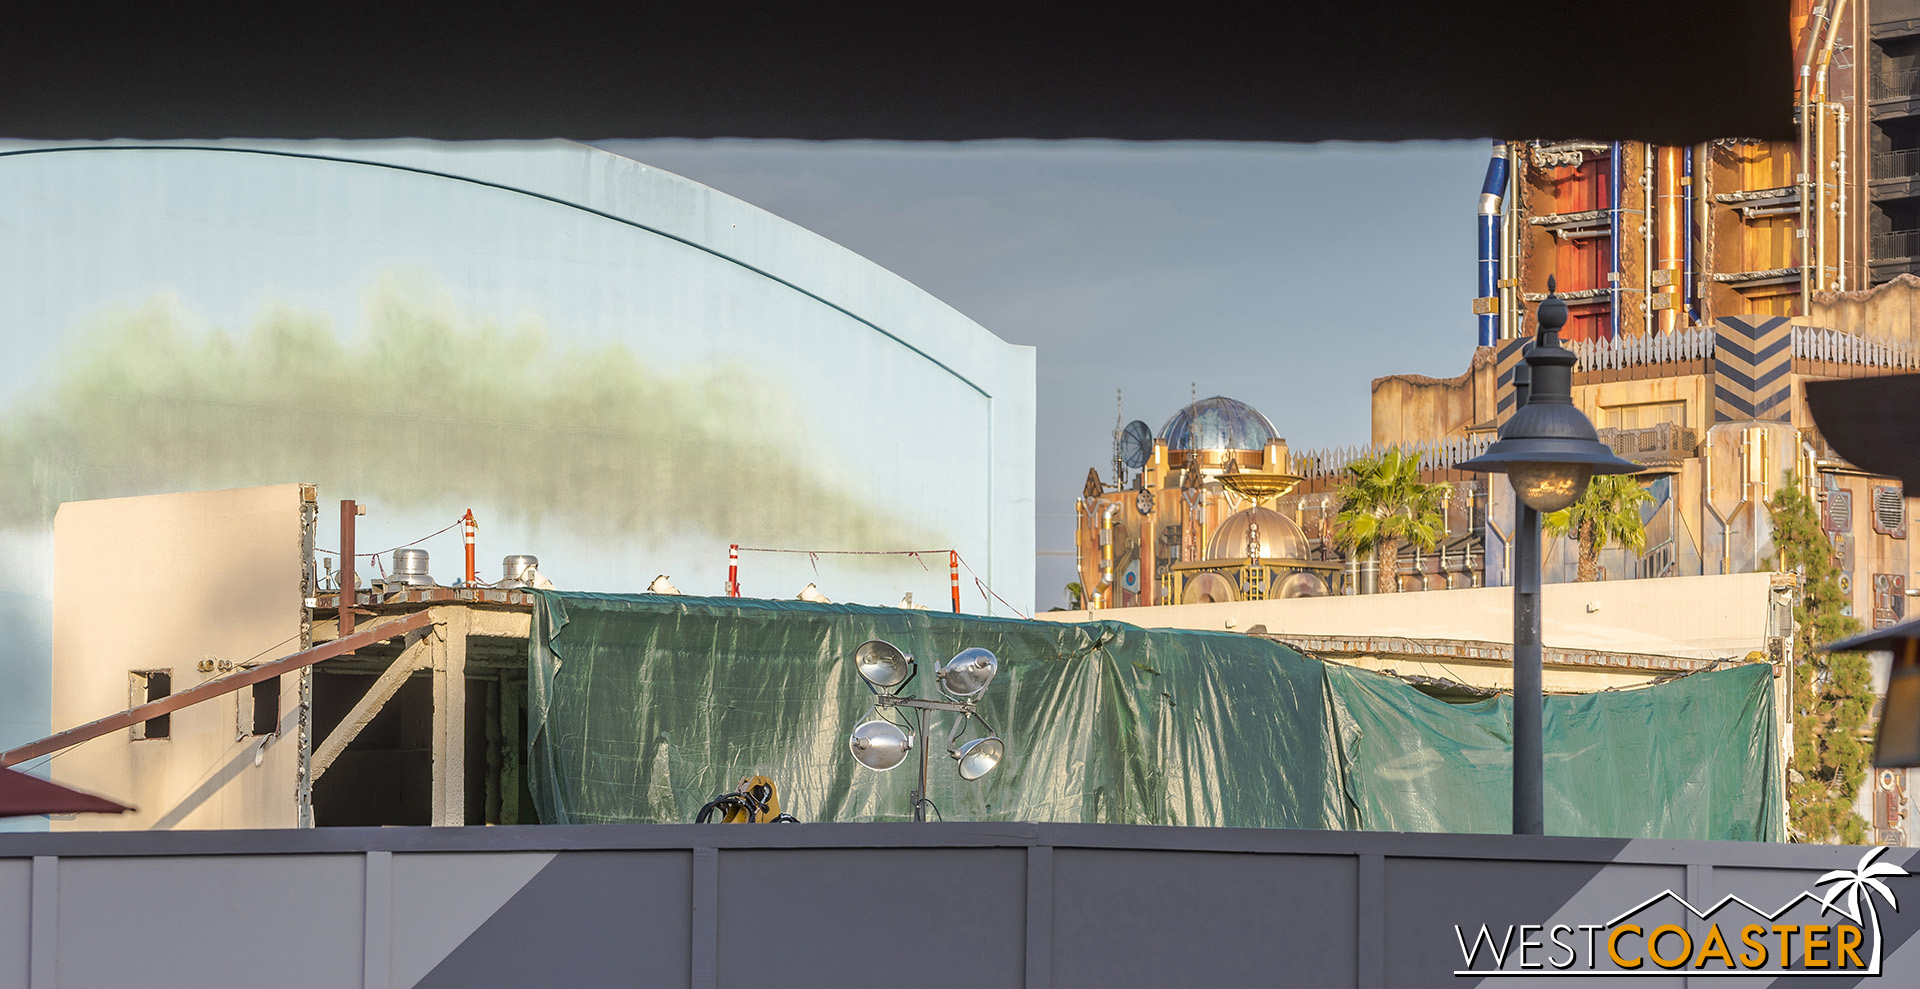  I hadn’t gone up there since the Cars Land construction update photography days. 